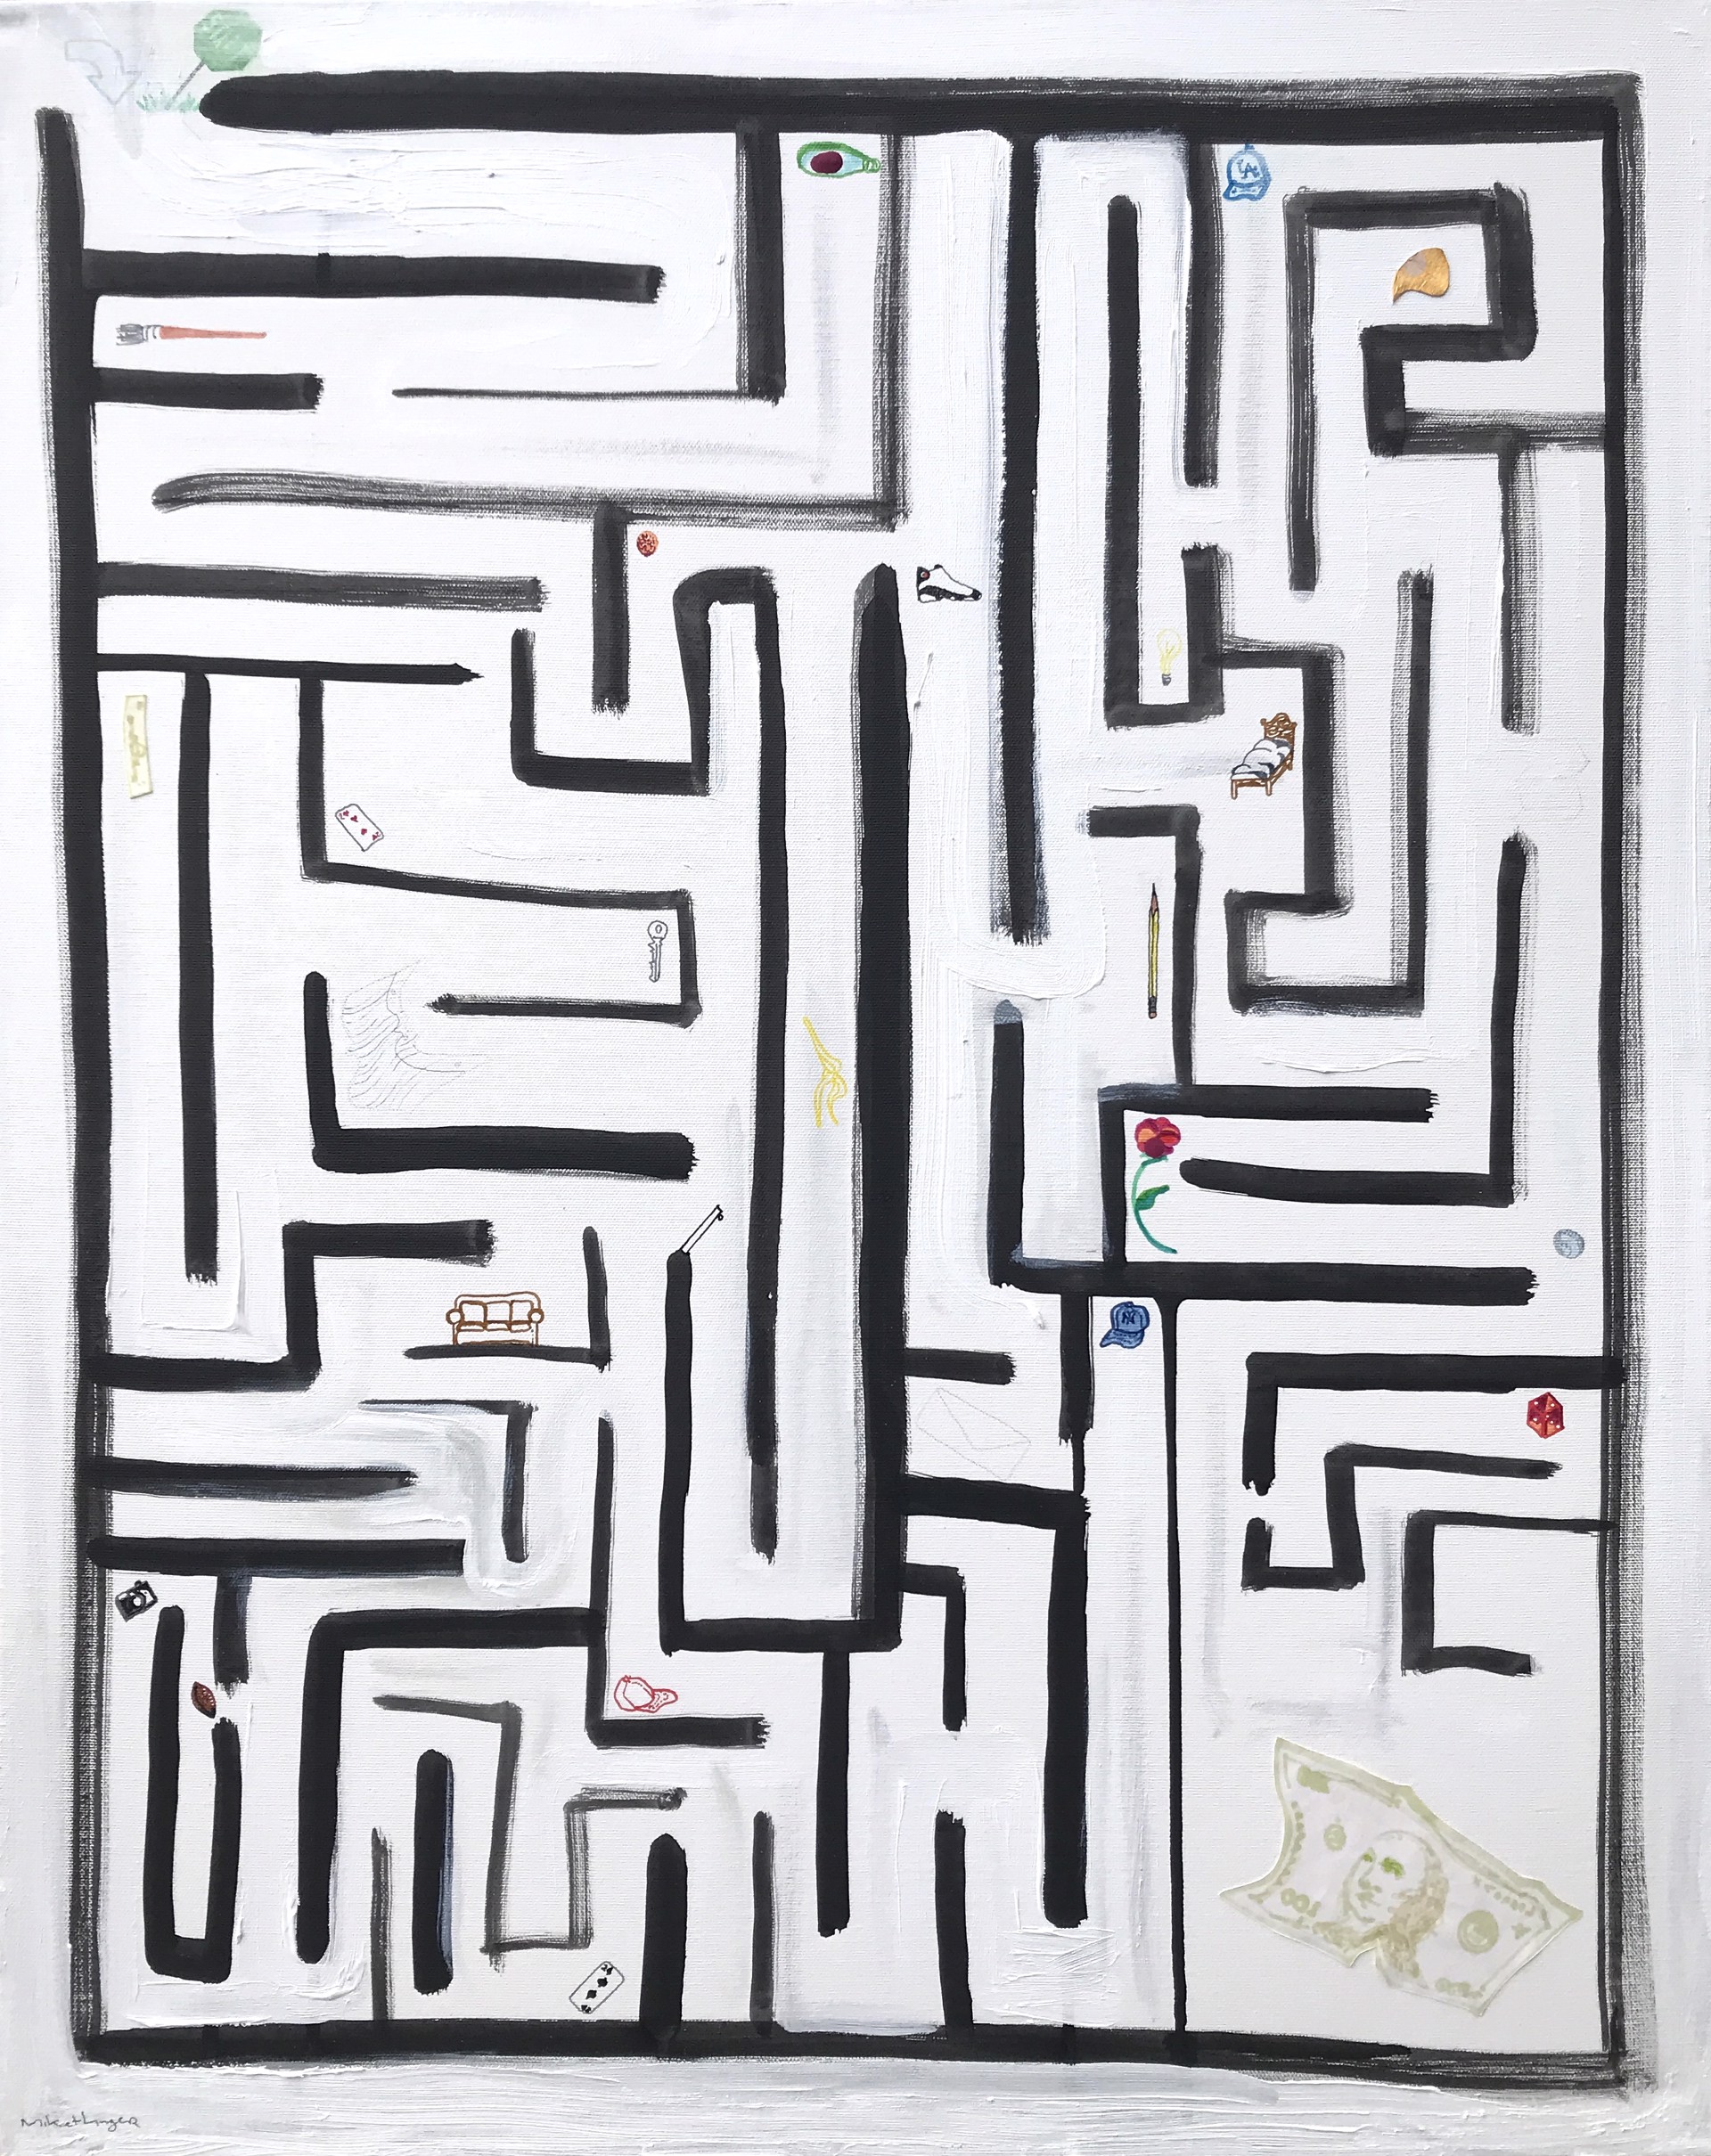 Maze #1 by Mikey Kettinger